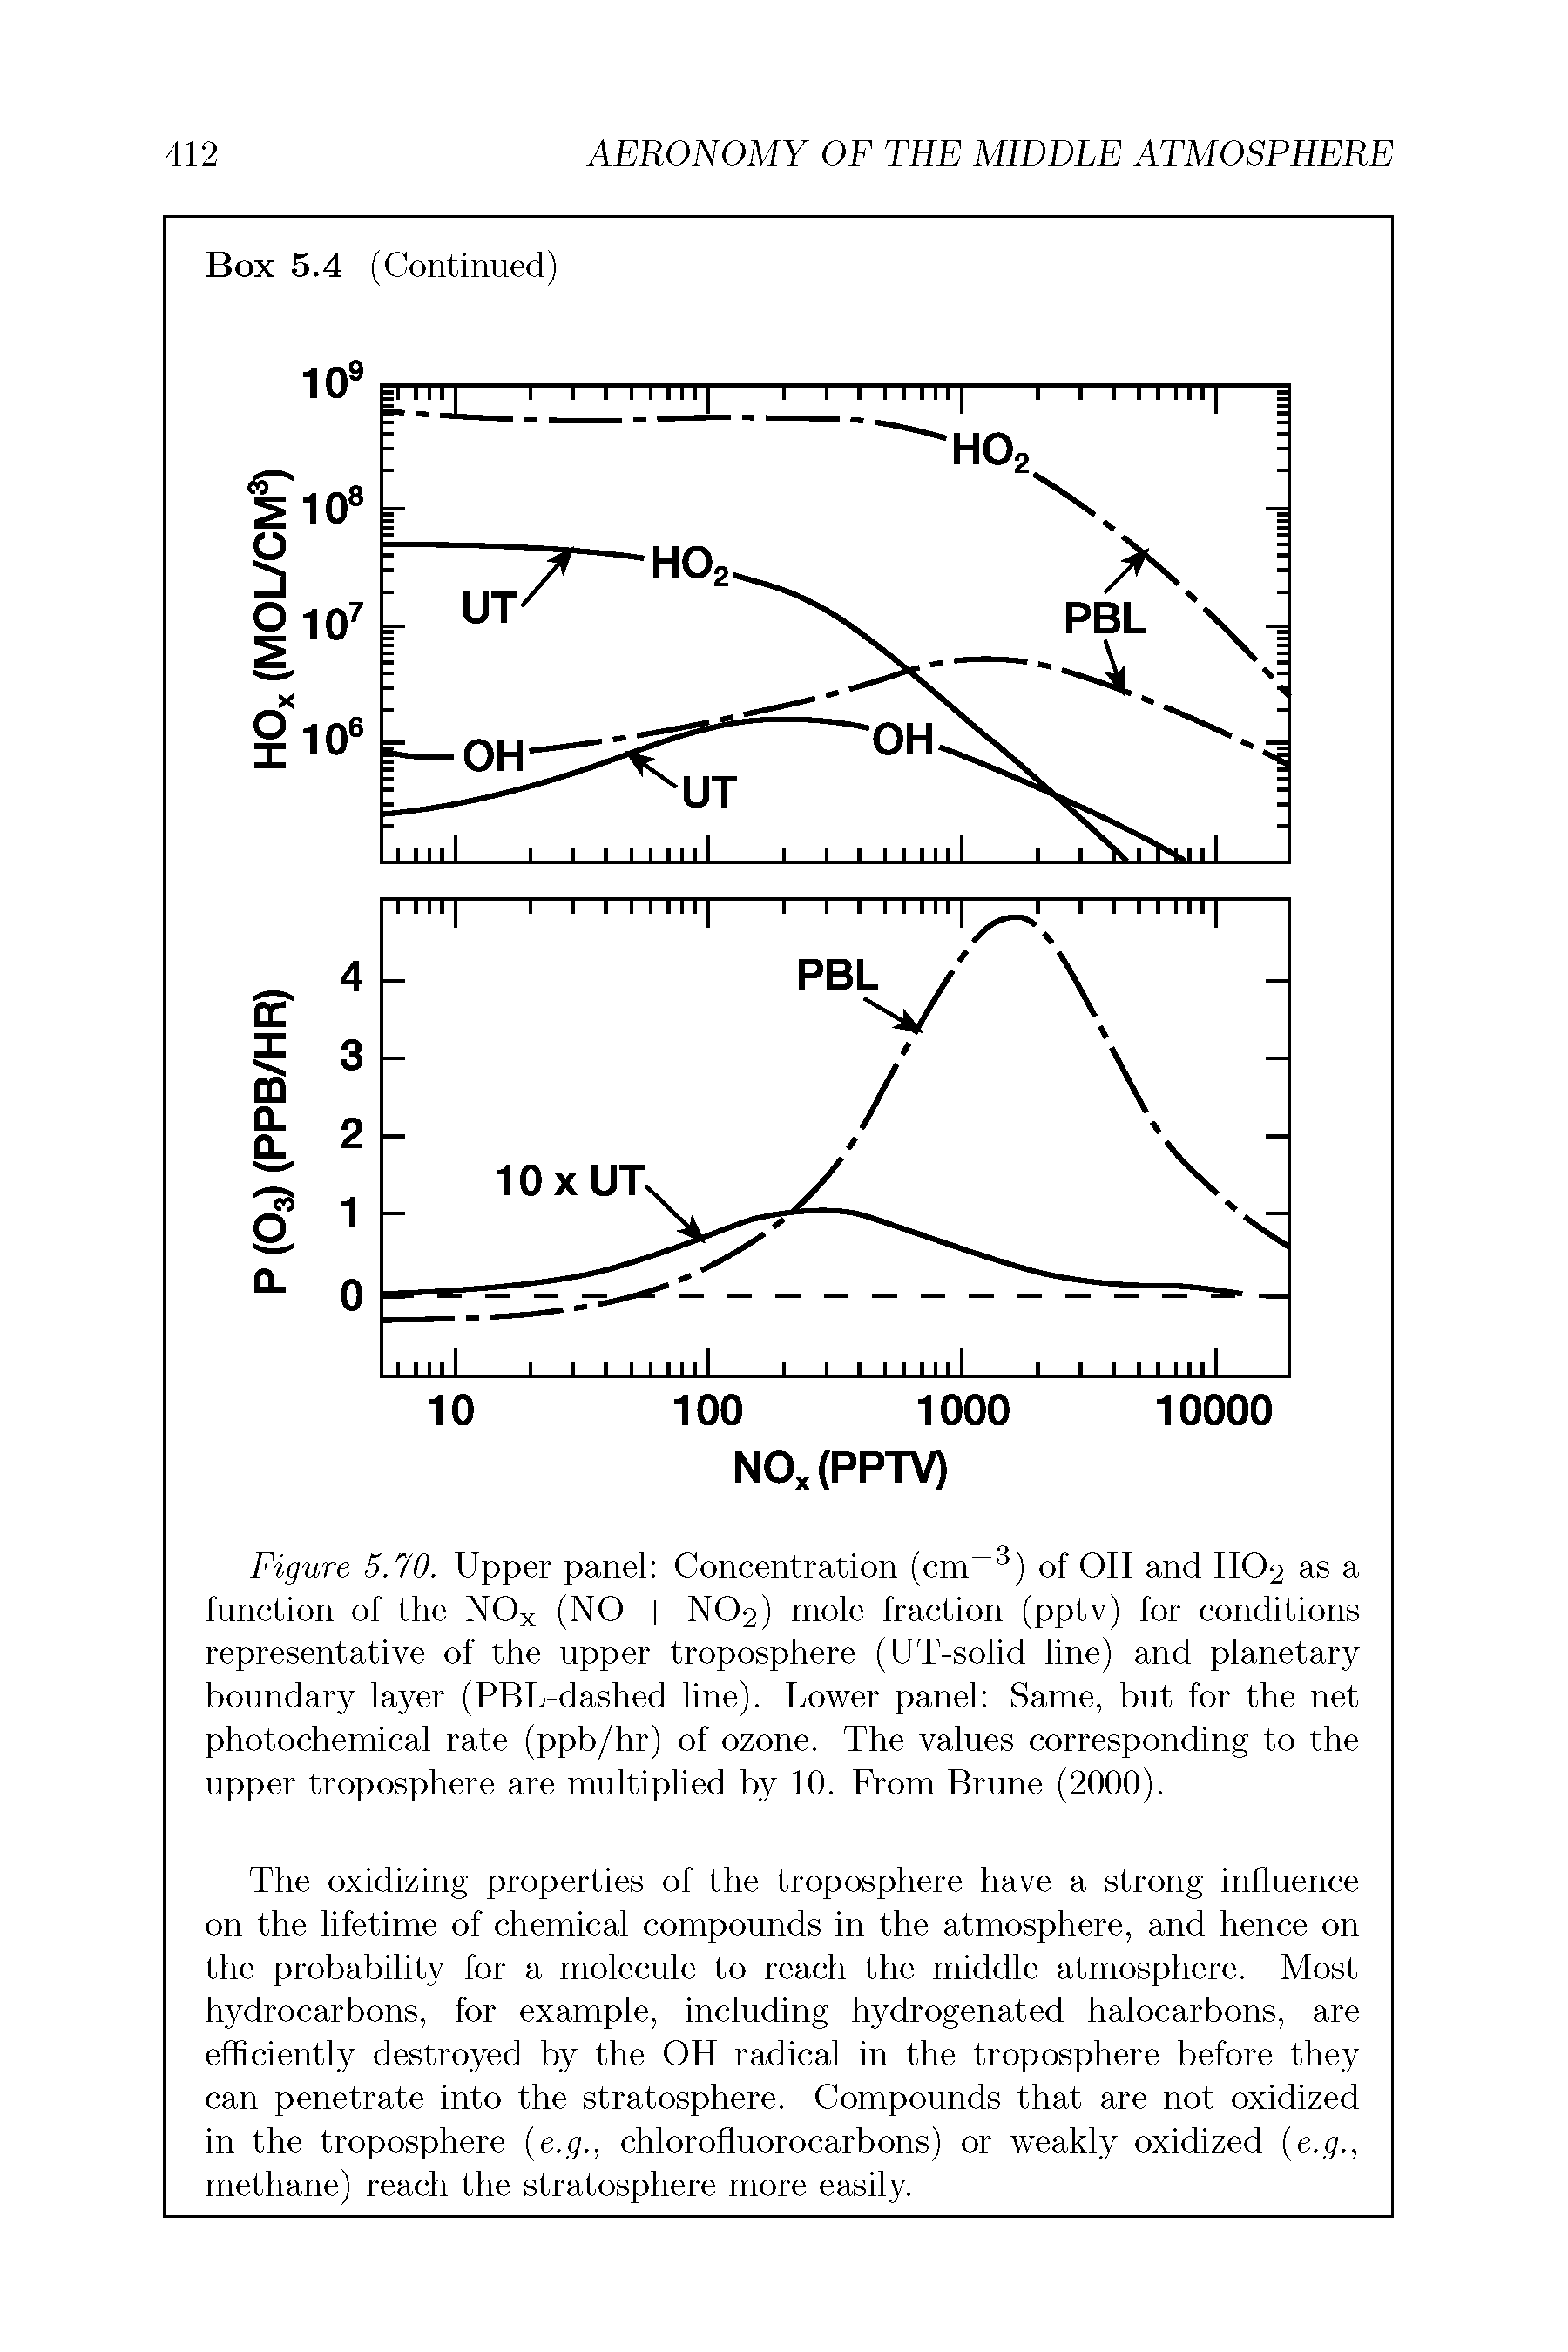 Figure 5.70. Upper panel Concentration (cm-3) of OH and HO2 as a function of the NOx (NO + NO2) mole fraction (pptv) for conditions representative of the upper troposphere (UT-solid line) and planetary boundary layer (PBL-dashed line). Lower panel Same, but for the net photochemical rate (ppb/hr) of ozone. The values corresponding to the upper troposphere are multiplied by 10. From Brune (2000).